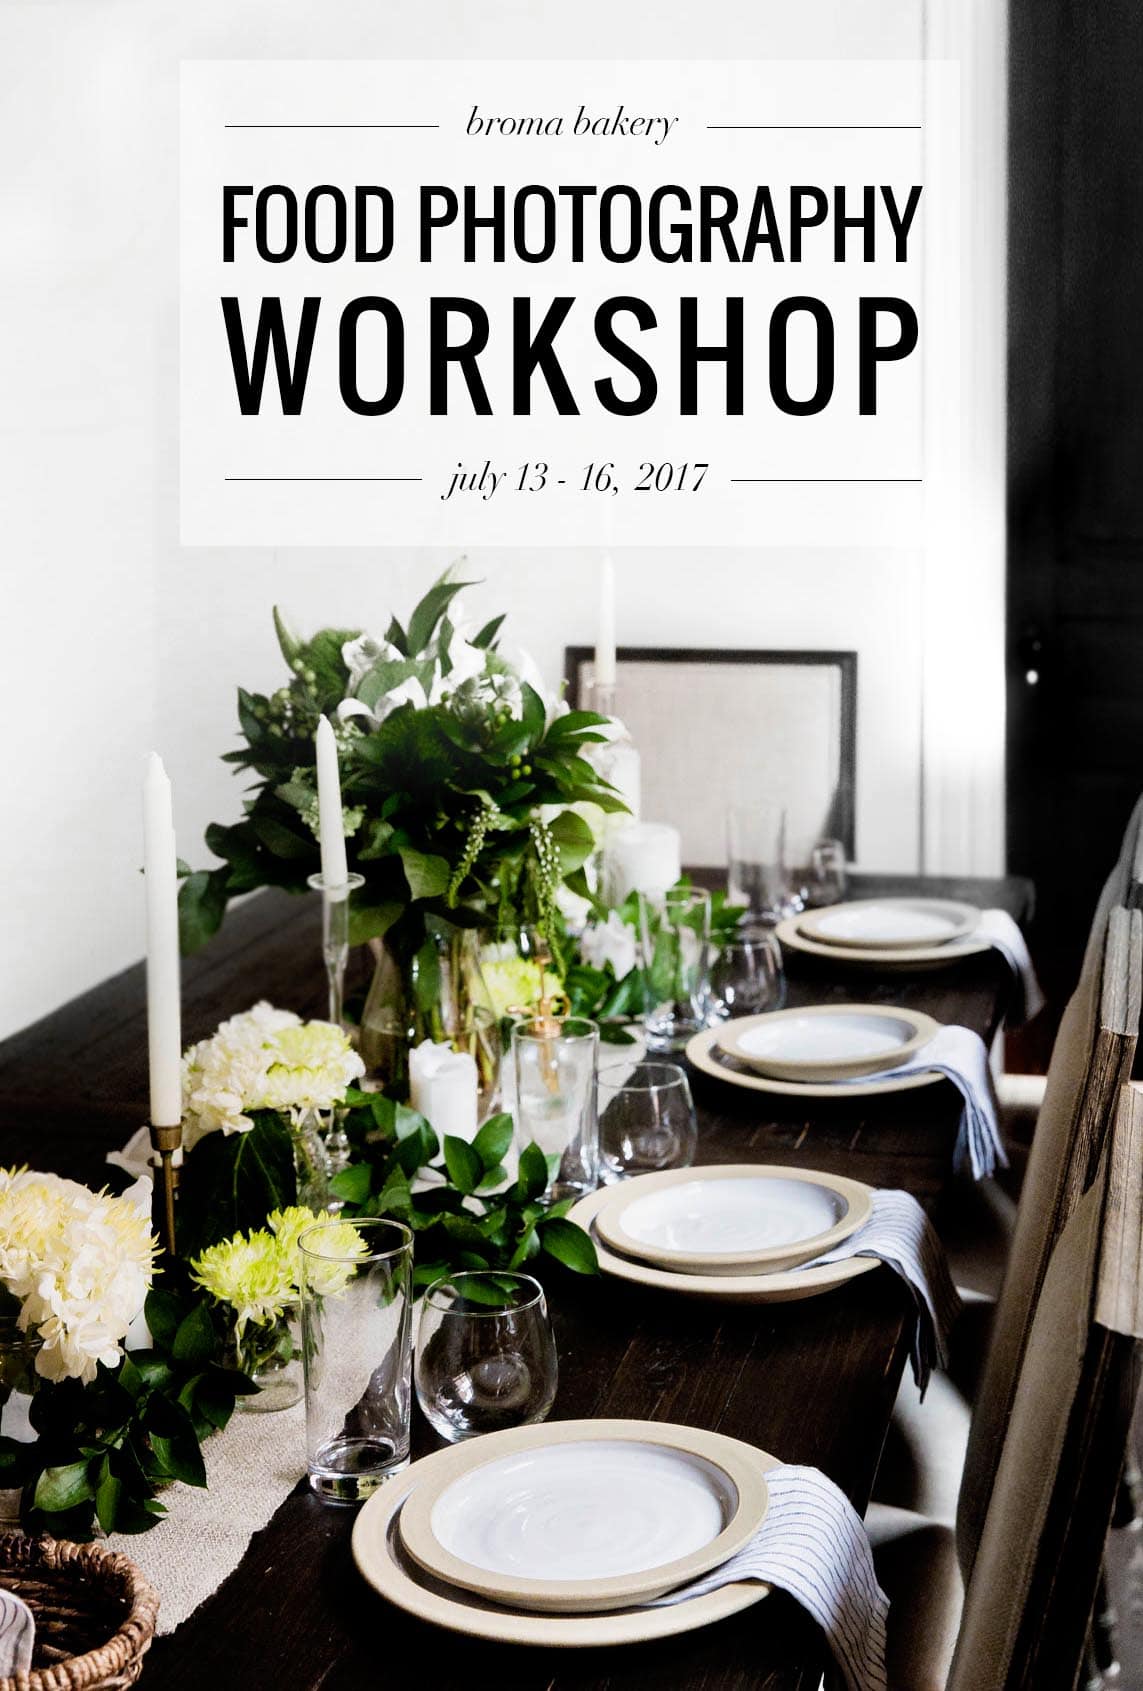 Come join us July 13-16, 2017 for a 4-day food photography workshop in Ann Arbor, MI! 